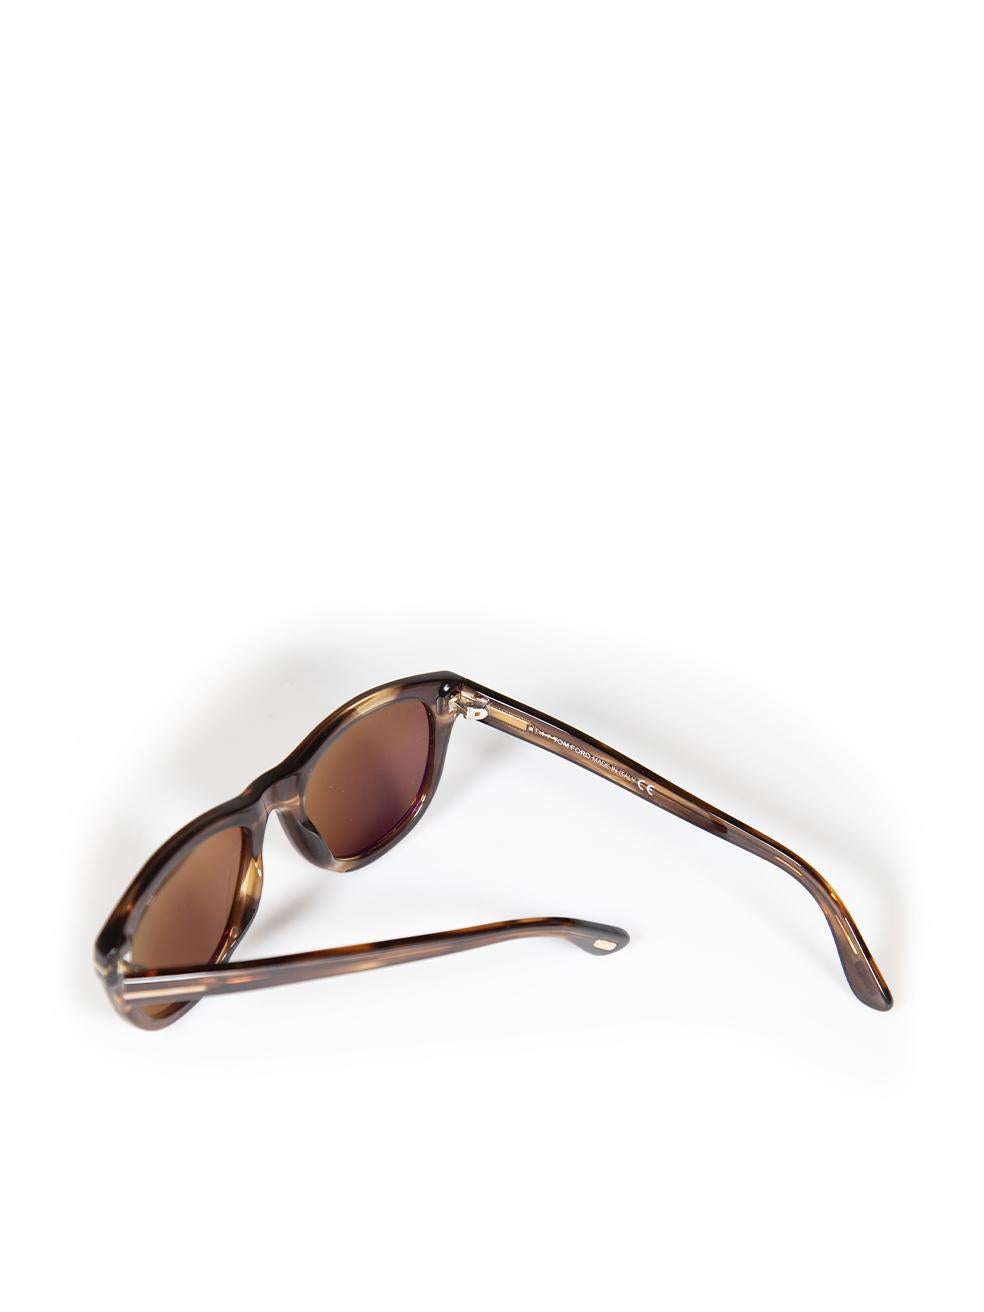 Tom Ford Brown Benedict Cat Eye Sunglasses For Sale 3